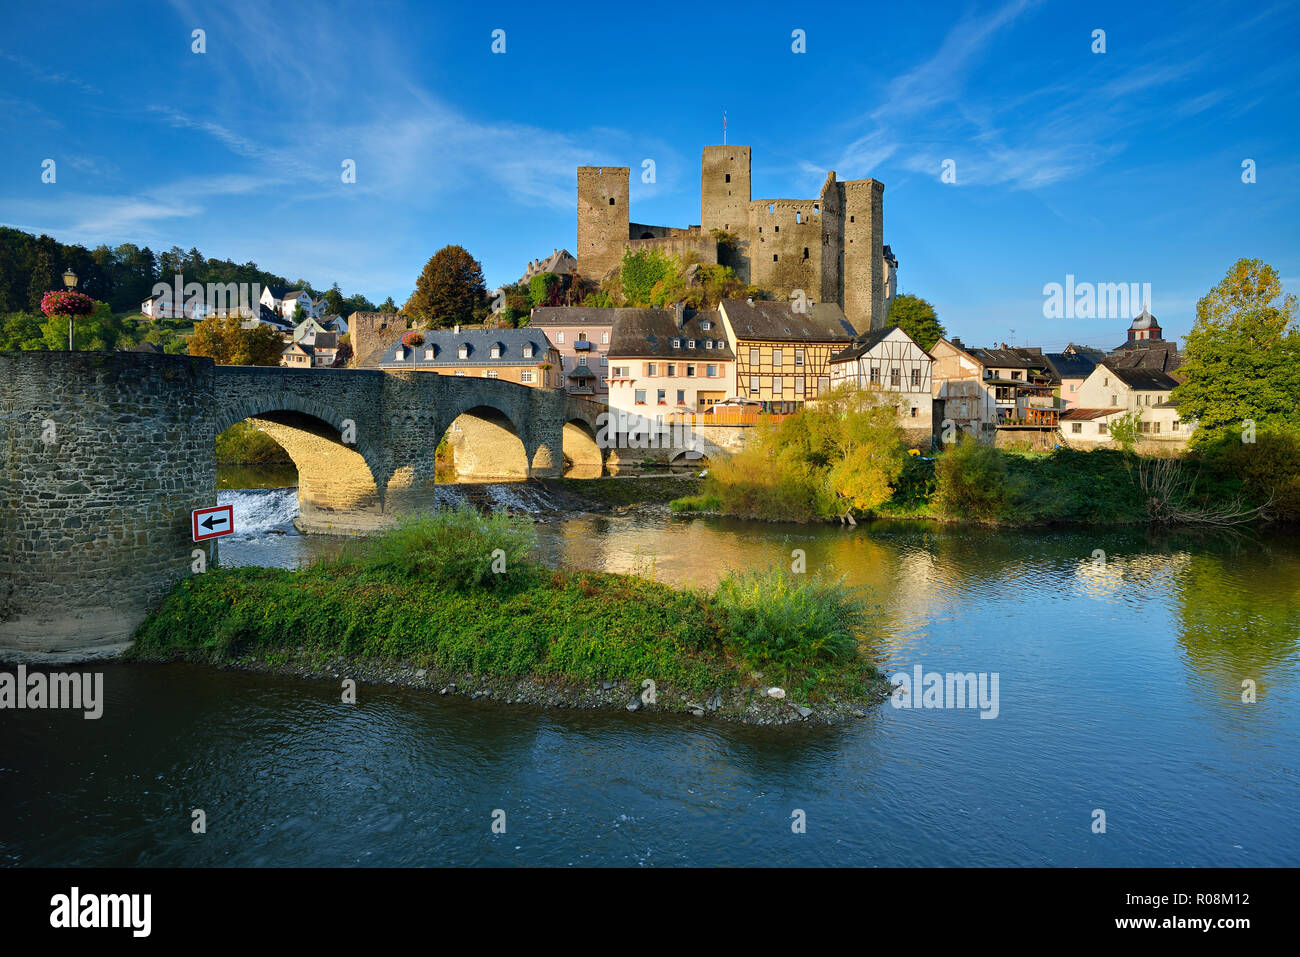 Castle and town Runkel with medieval stone bridge over the river Lahn, Runkel, Hesse, Germany Stock Photo